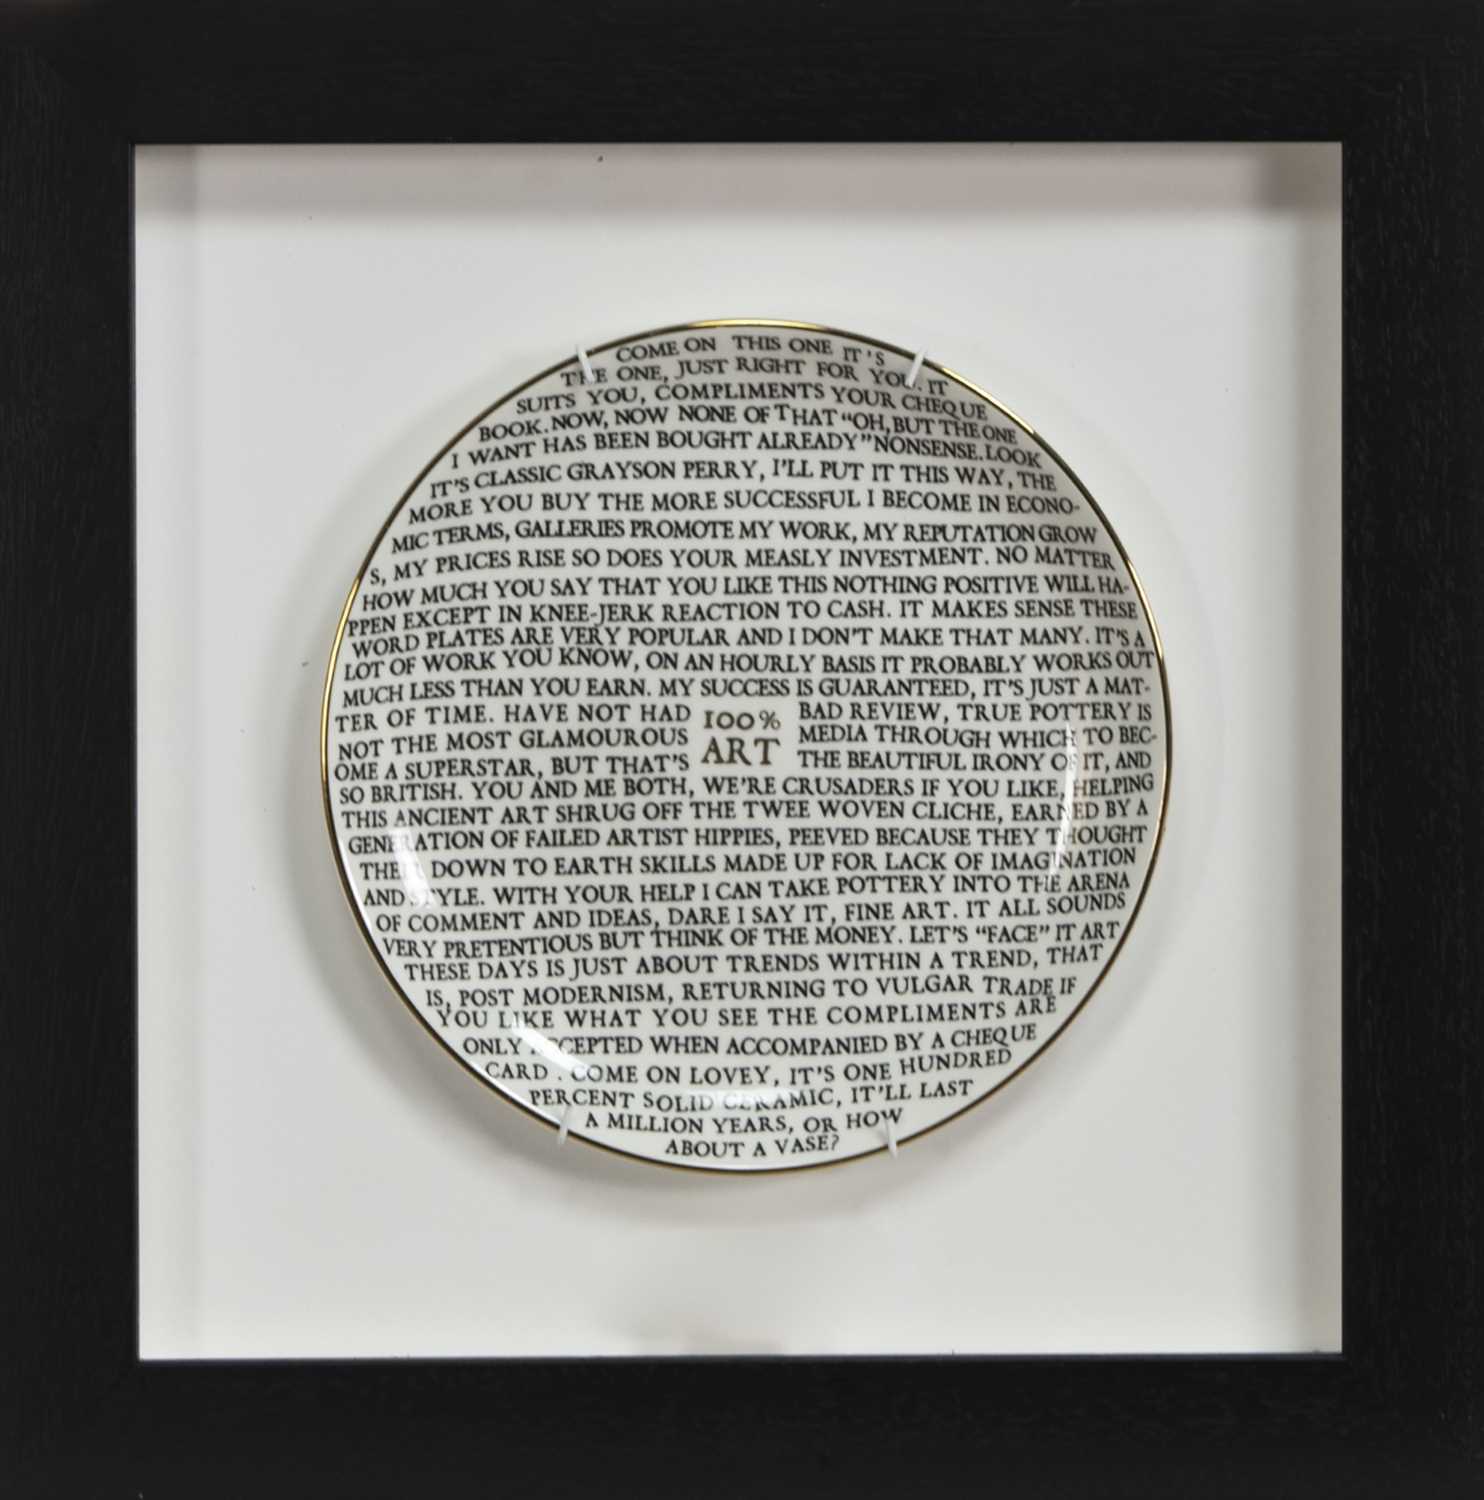 Lot 636 - 100% ART PLATE BY GRAYSON PERRY